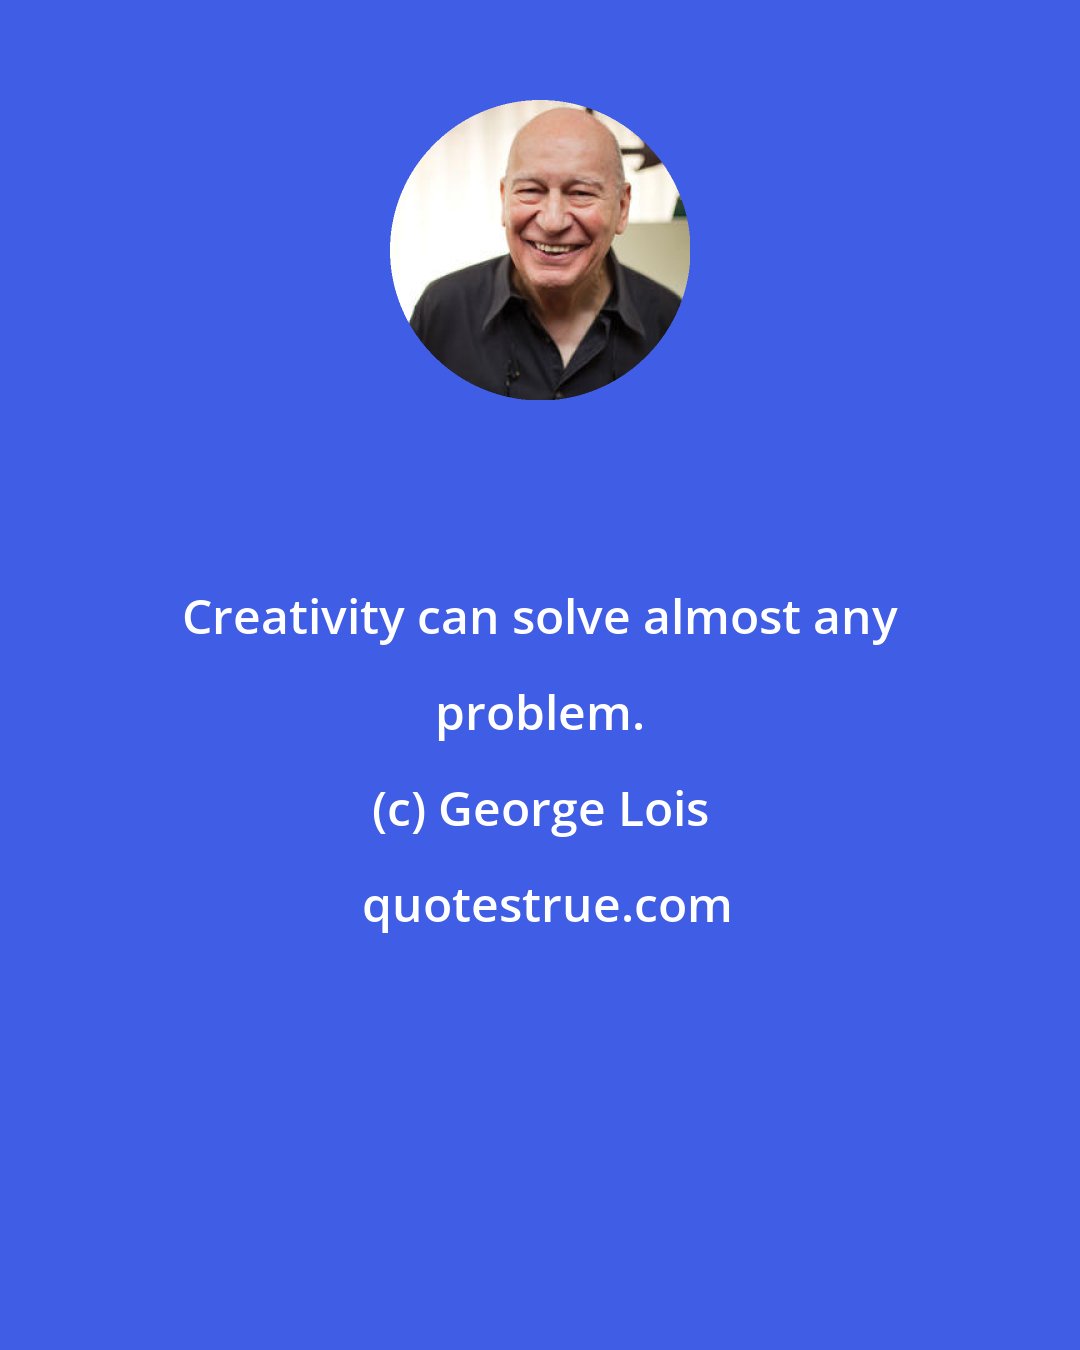 George Lois: Creativity can solve almost any problem.